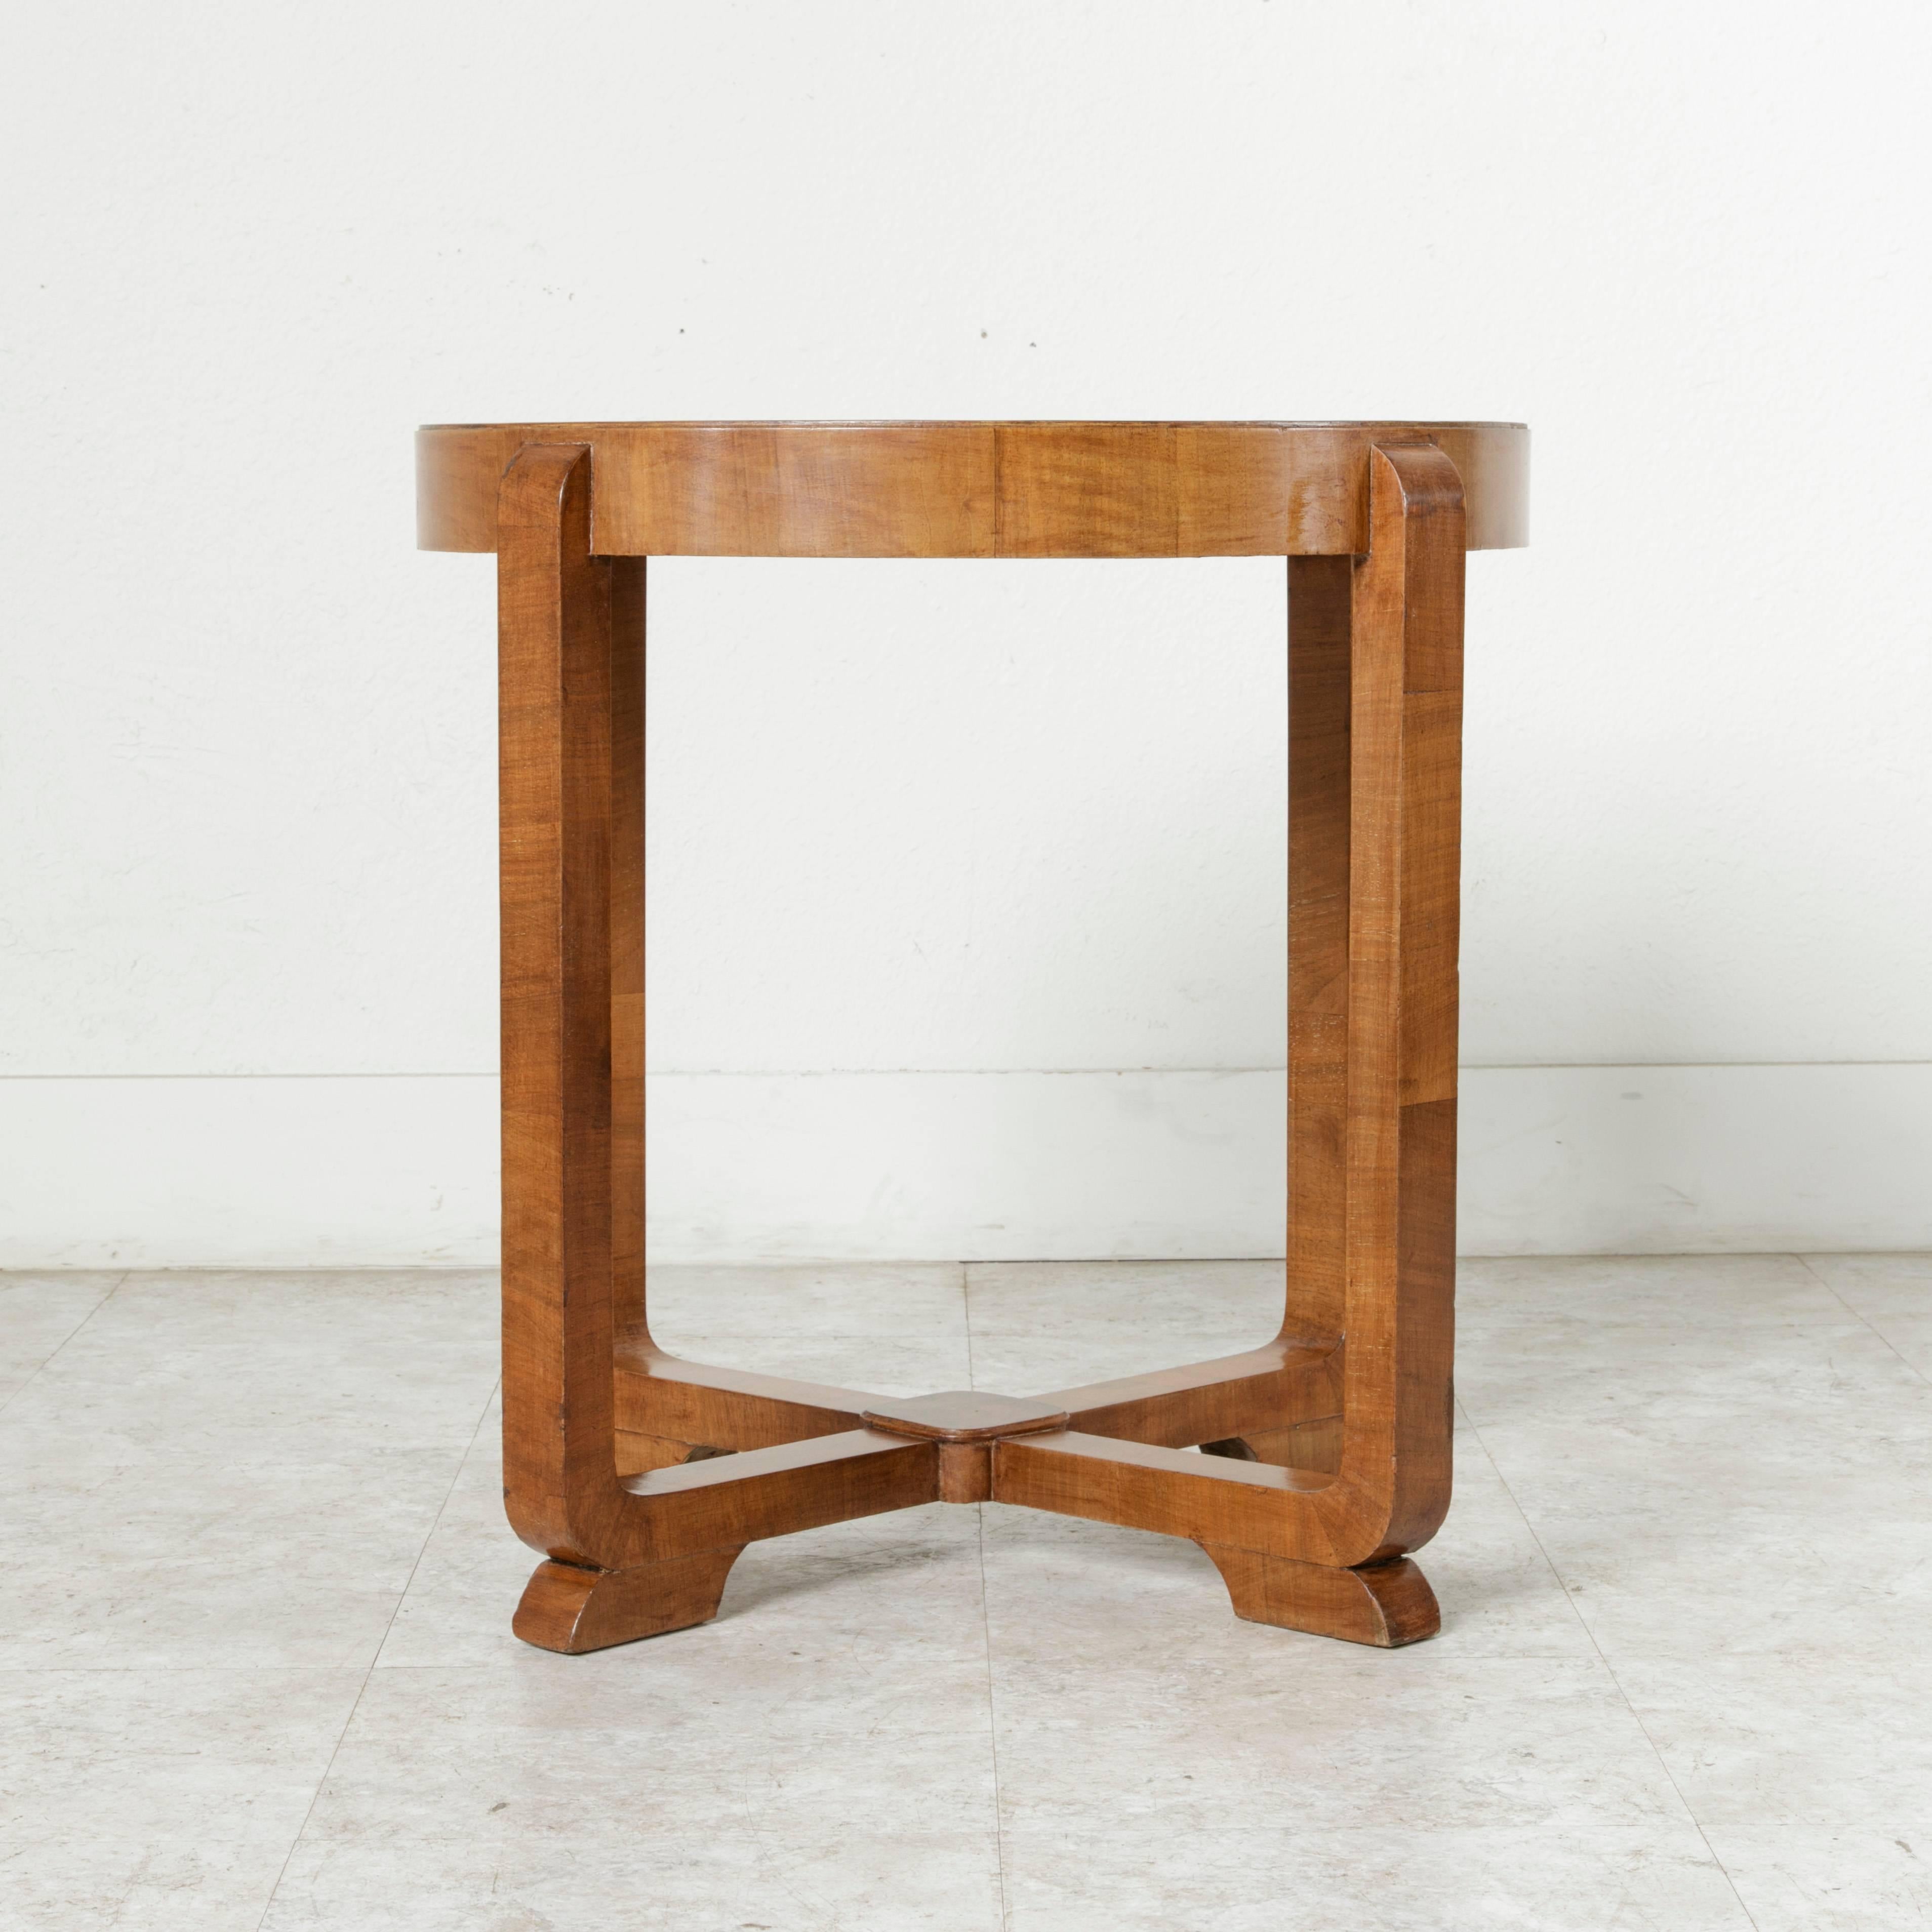 French Art Deco Period Bookmatched Burl Walnut Side Table, Occasional Table 5